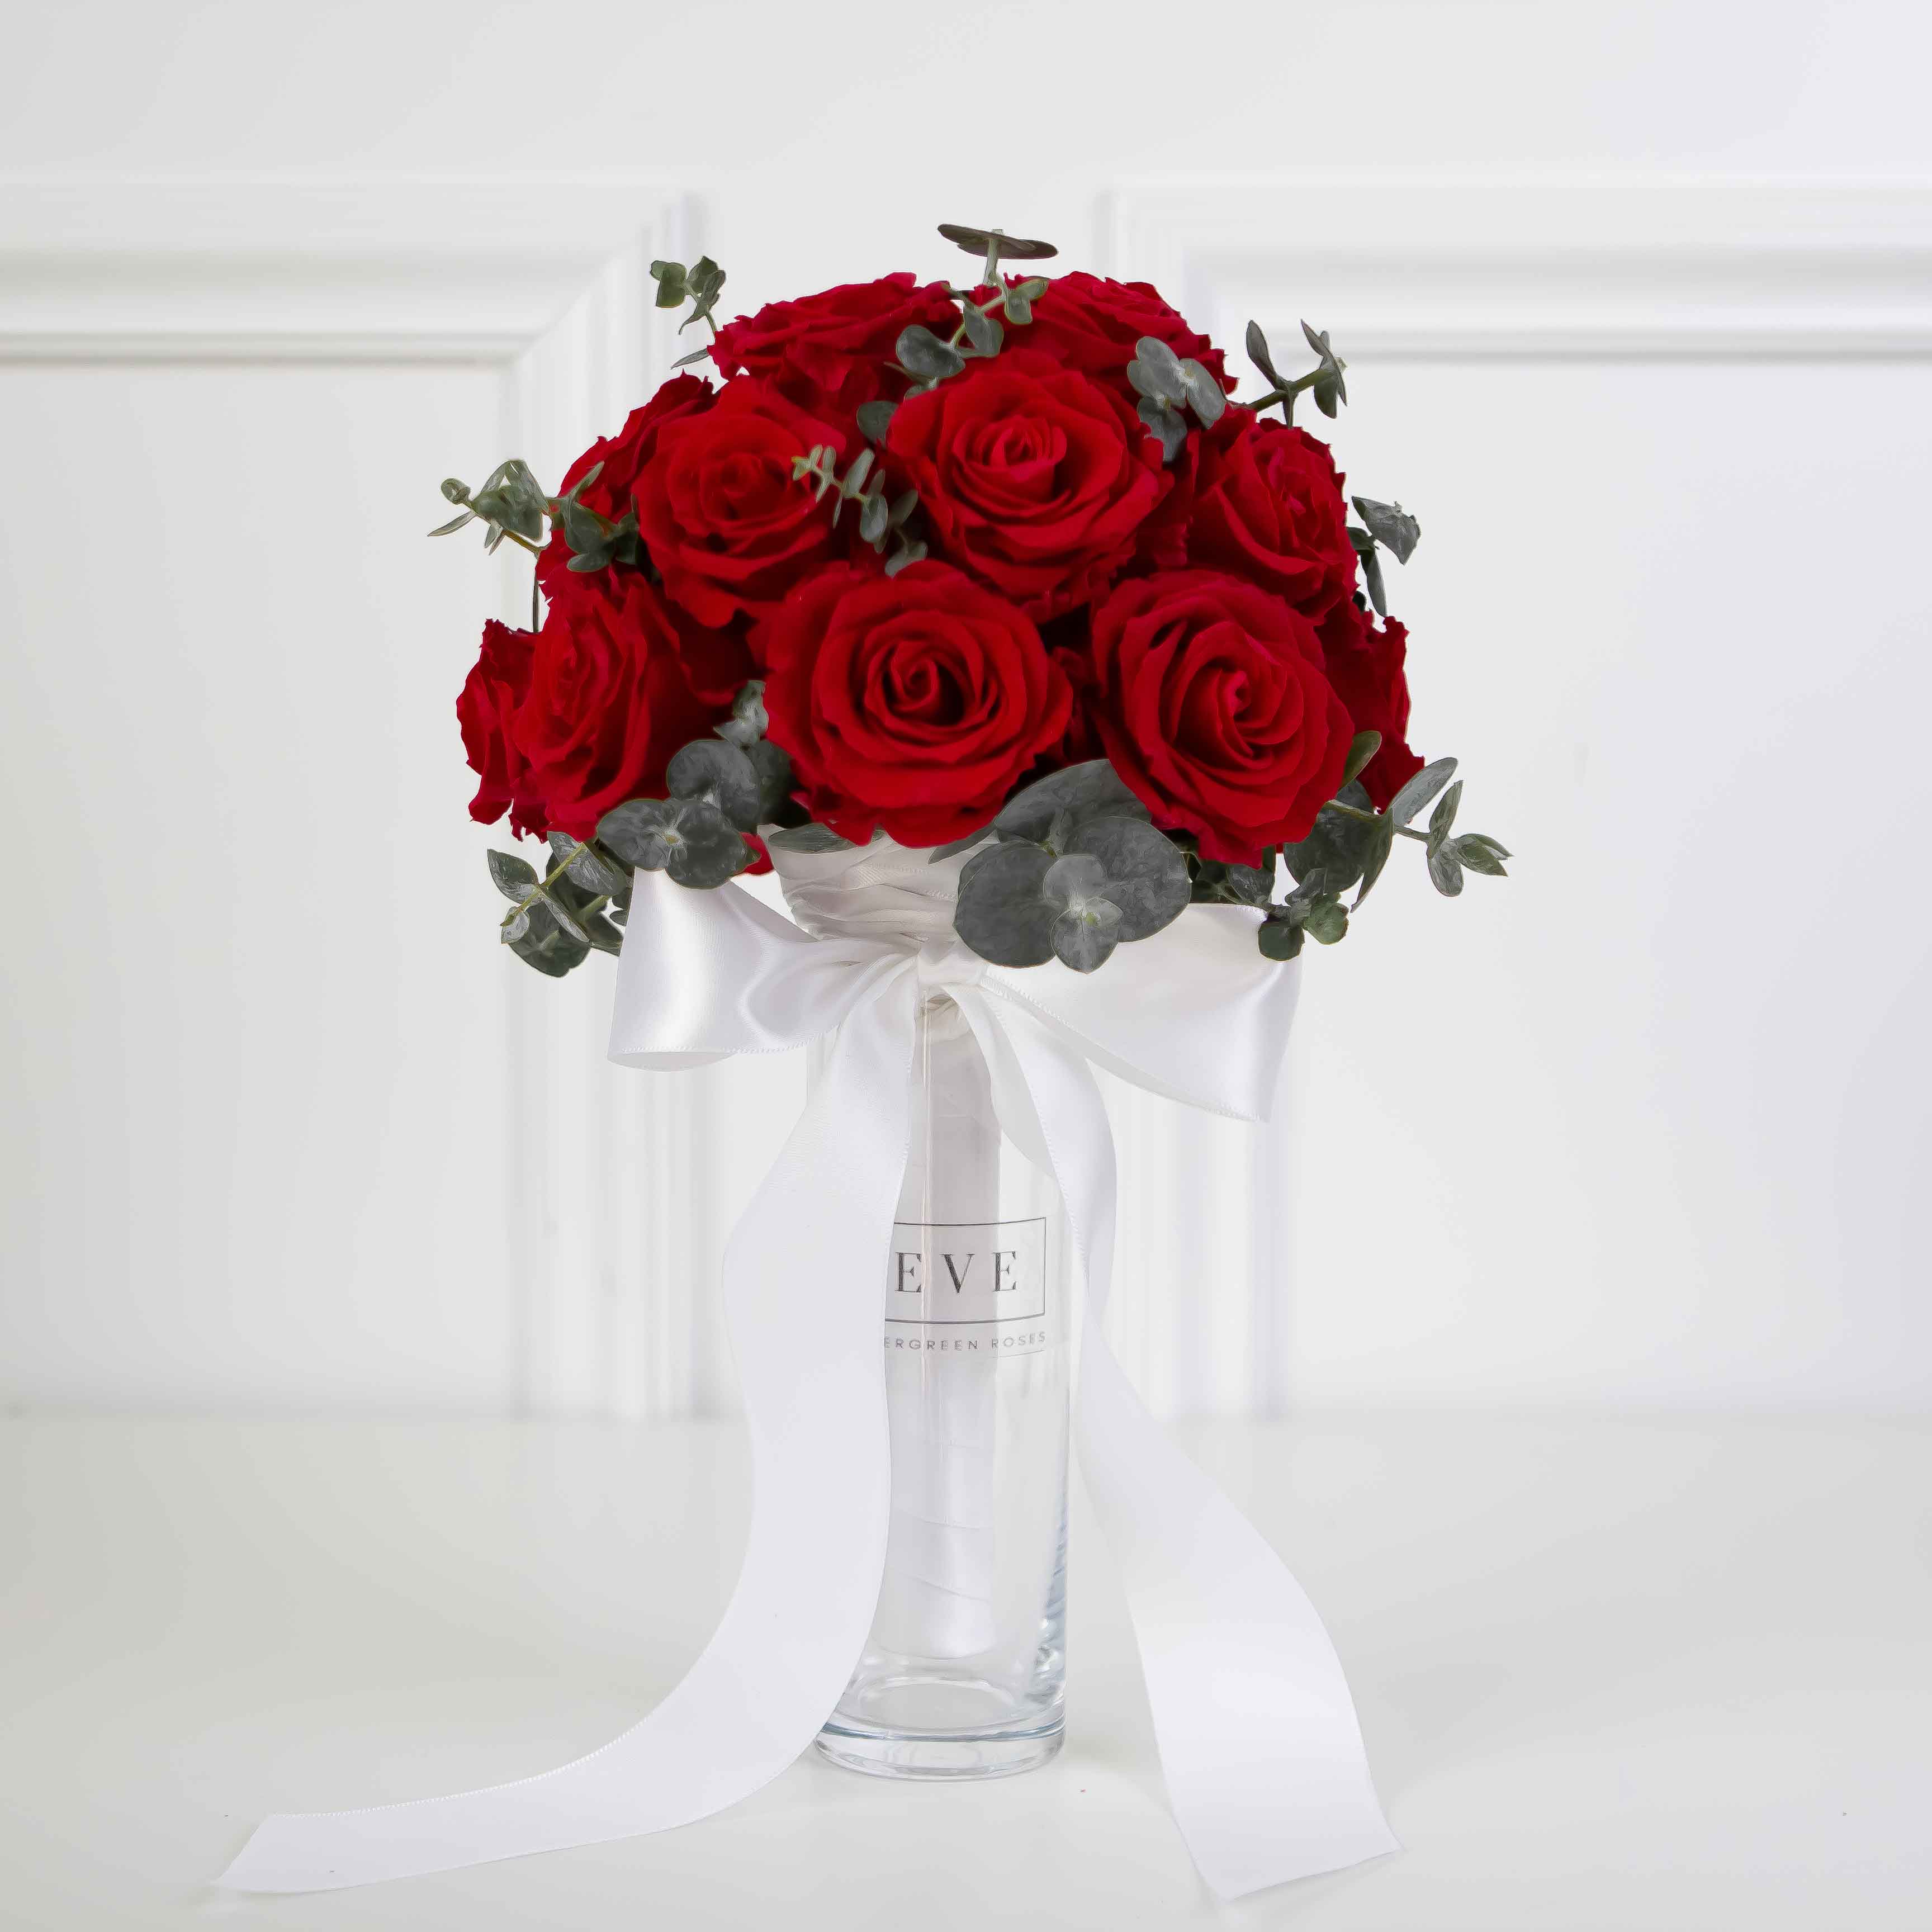 stamtavle kranium Daddy Wedding Bouquet with Red Roses and Eucalyptus – Evergreen Roses